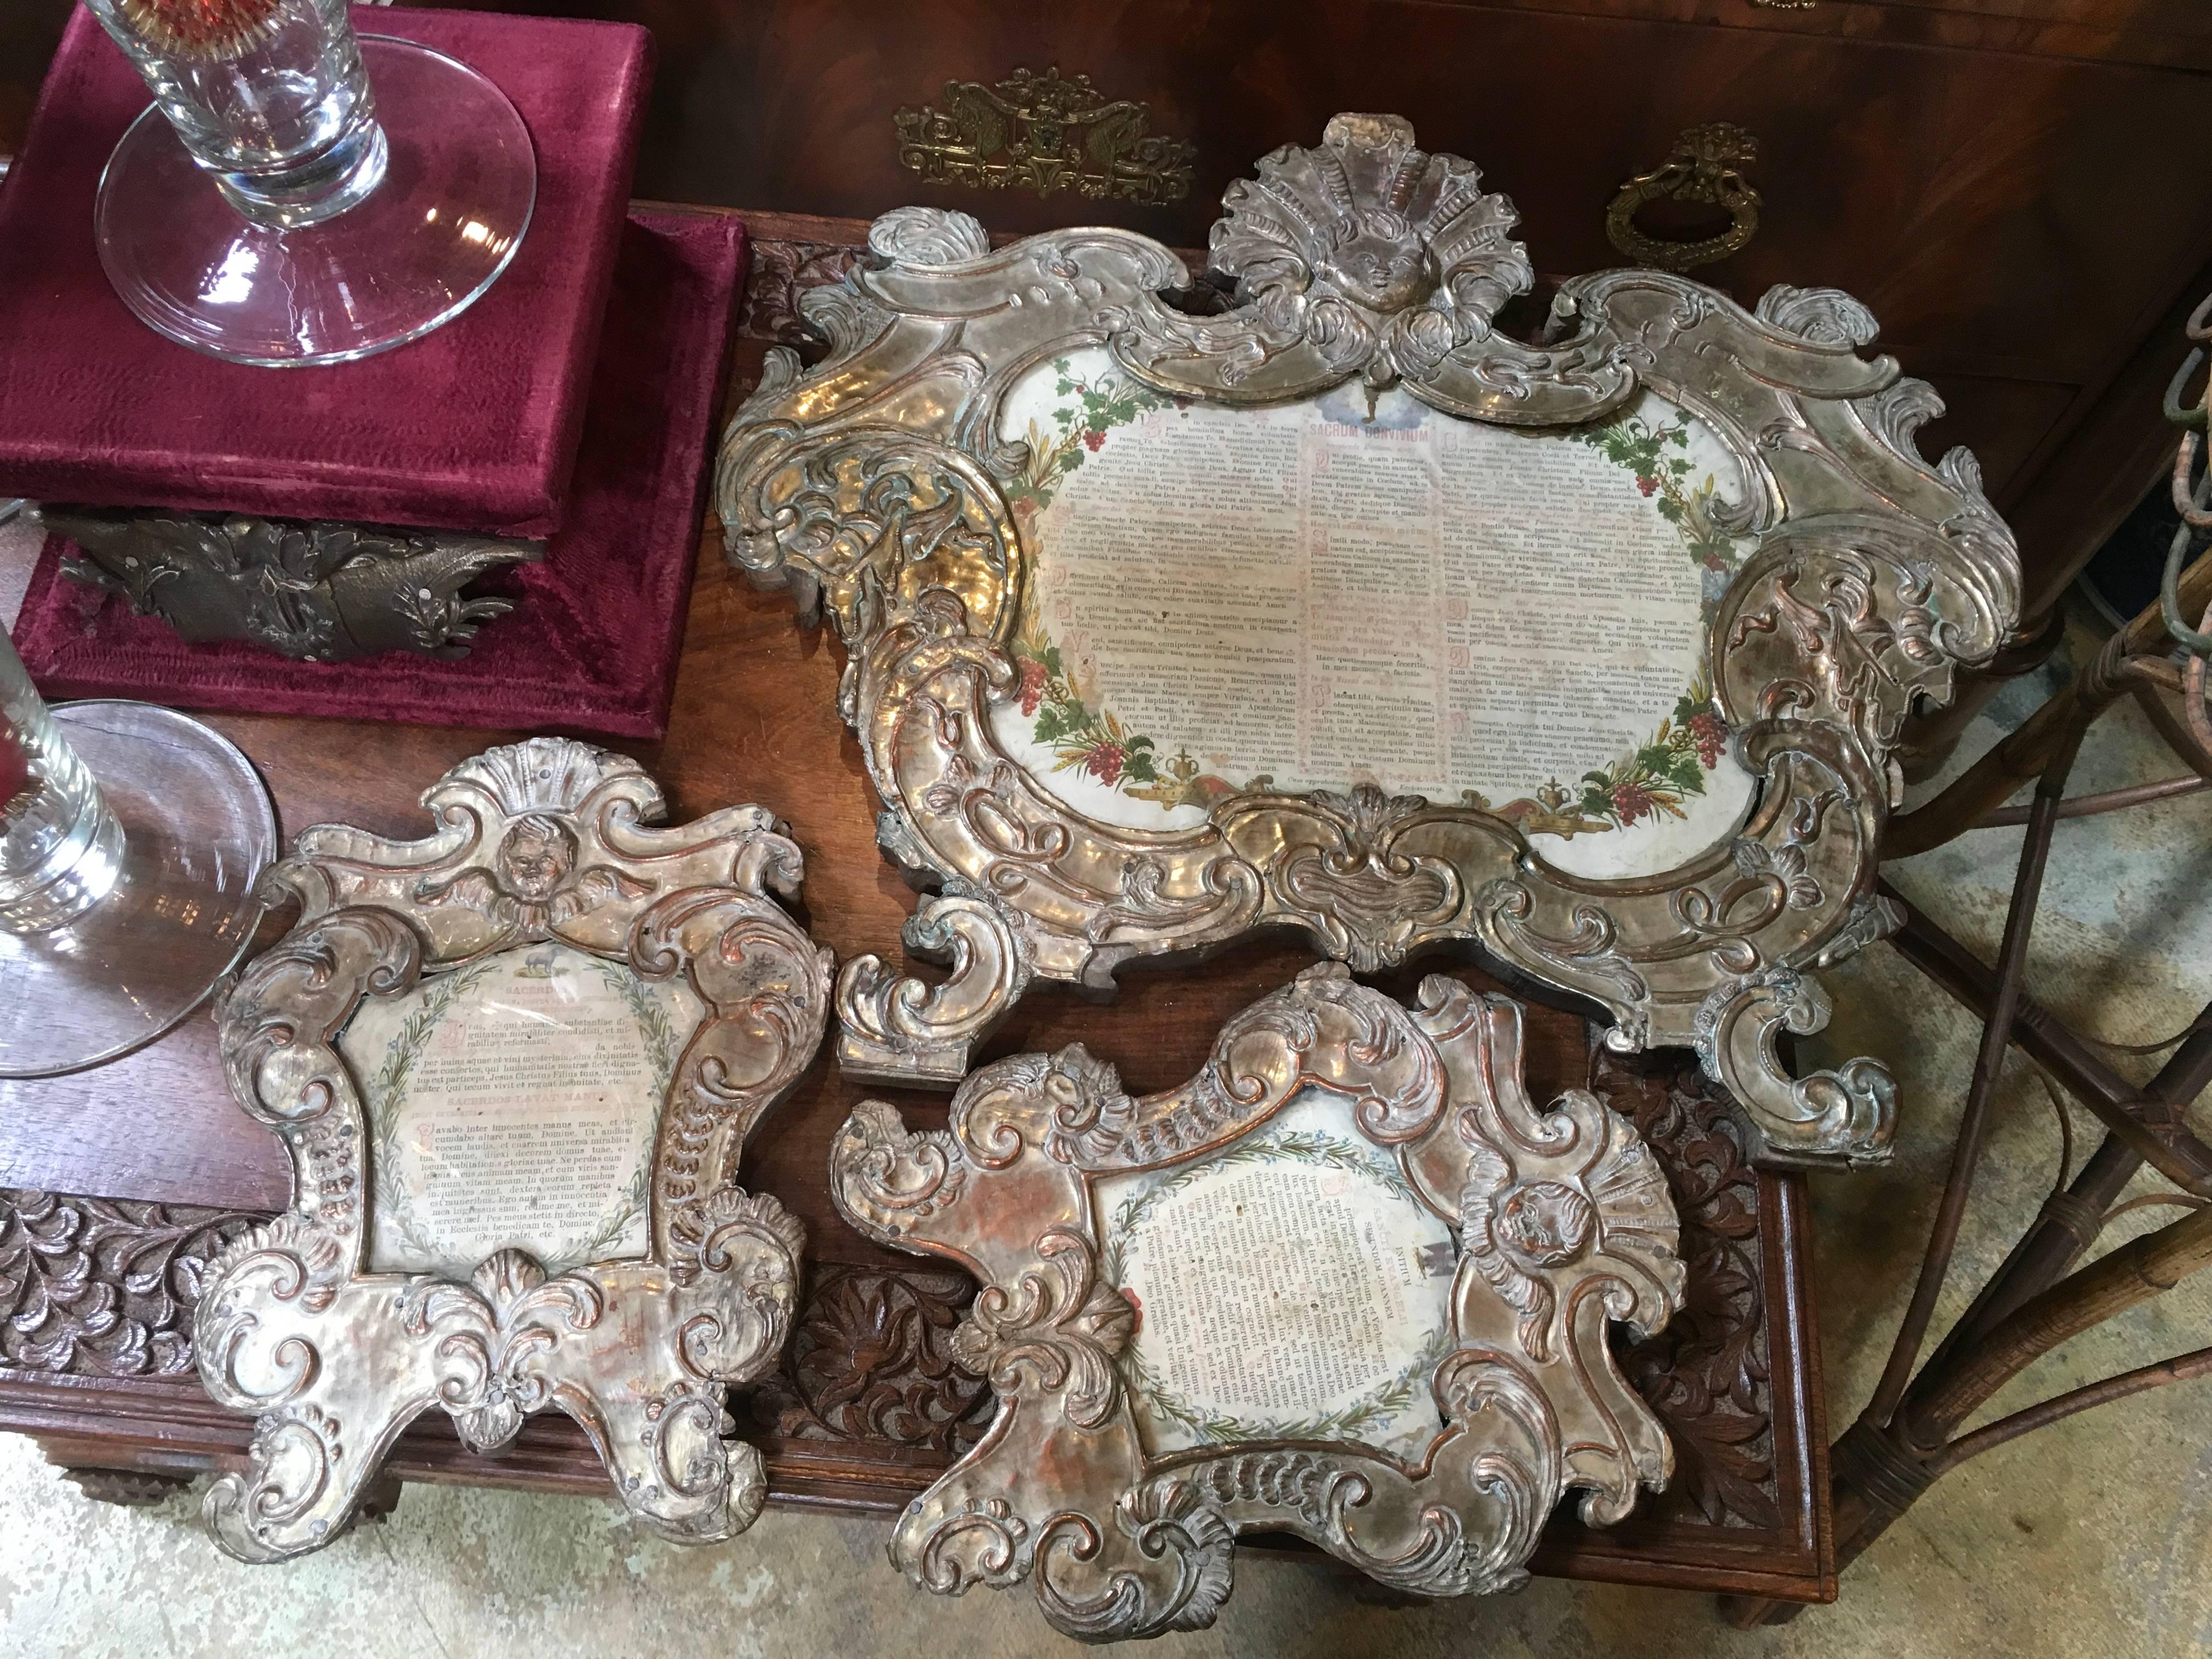 Set of three 18th century French Reliquaries.
Carved wood with metal repousse over the wood
Each piece contains the original Latin pages framed in original glass
These were used by the Catholics and represented relics used for prayers and